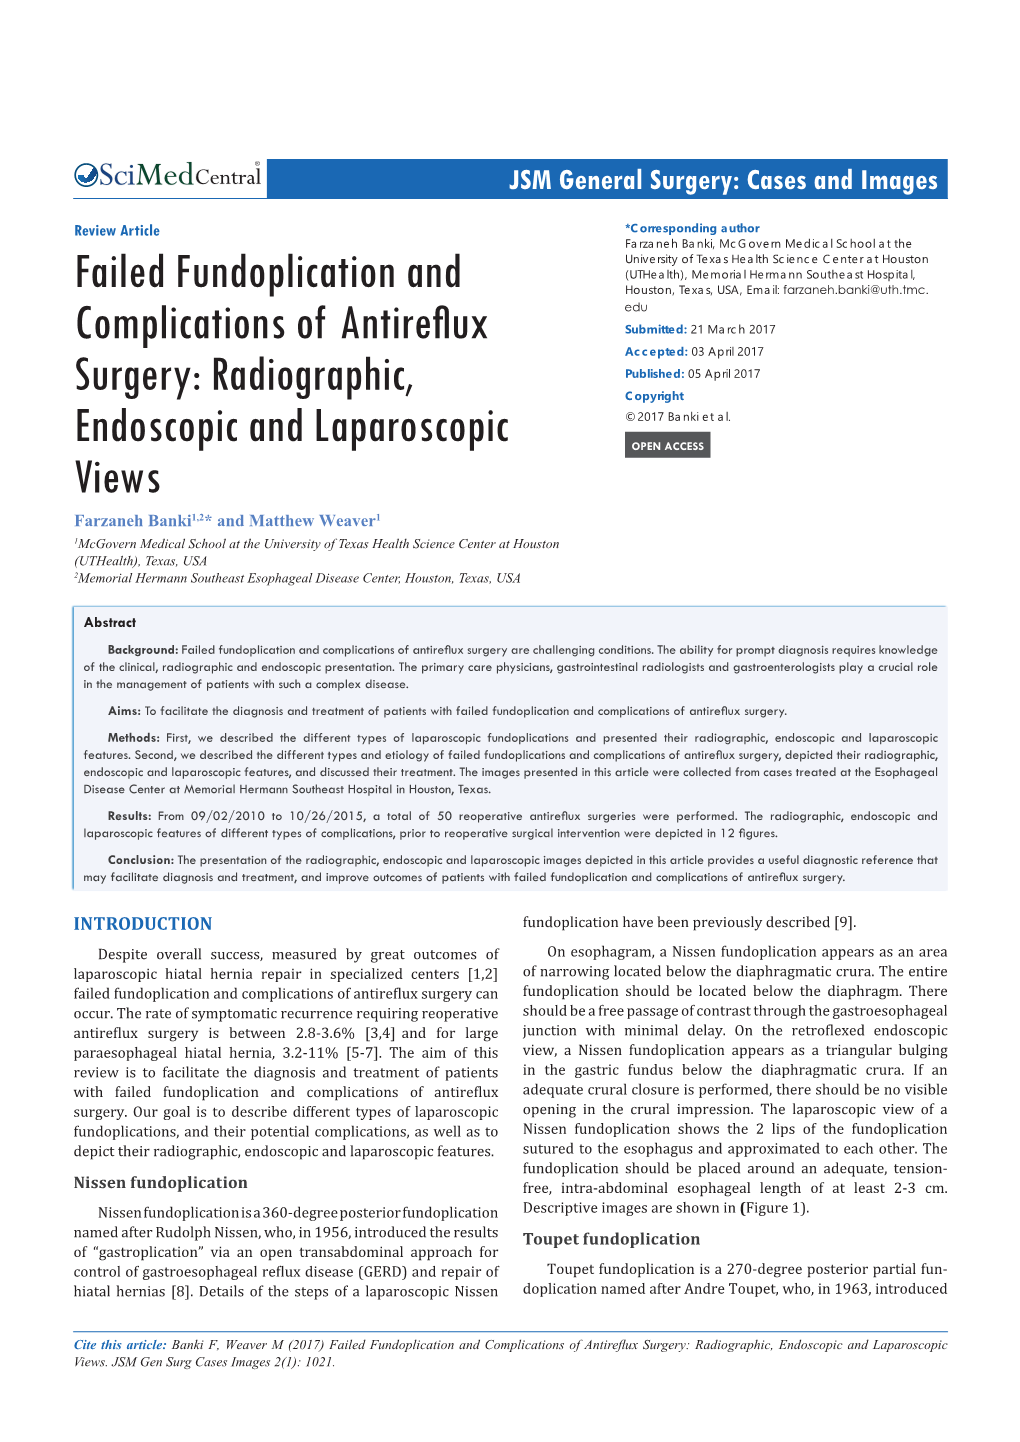 Failed Fundoplication and Complications of Antire Flux Surgery